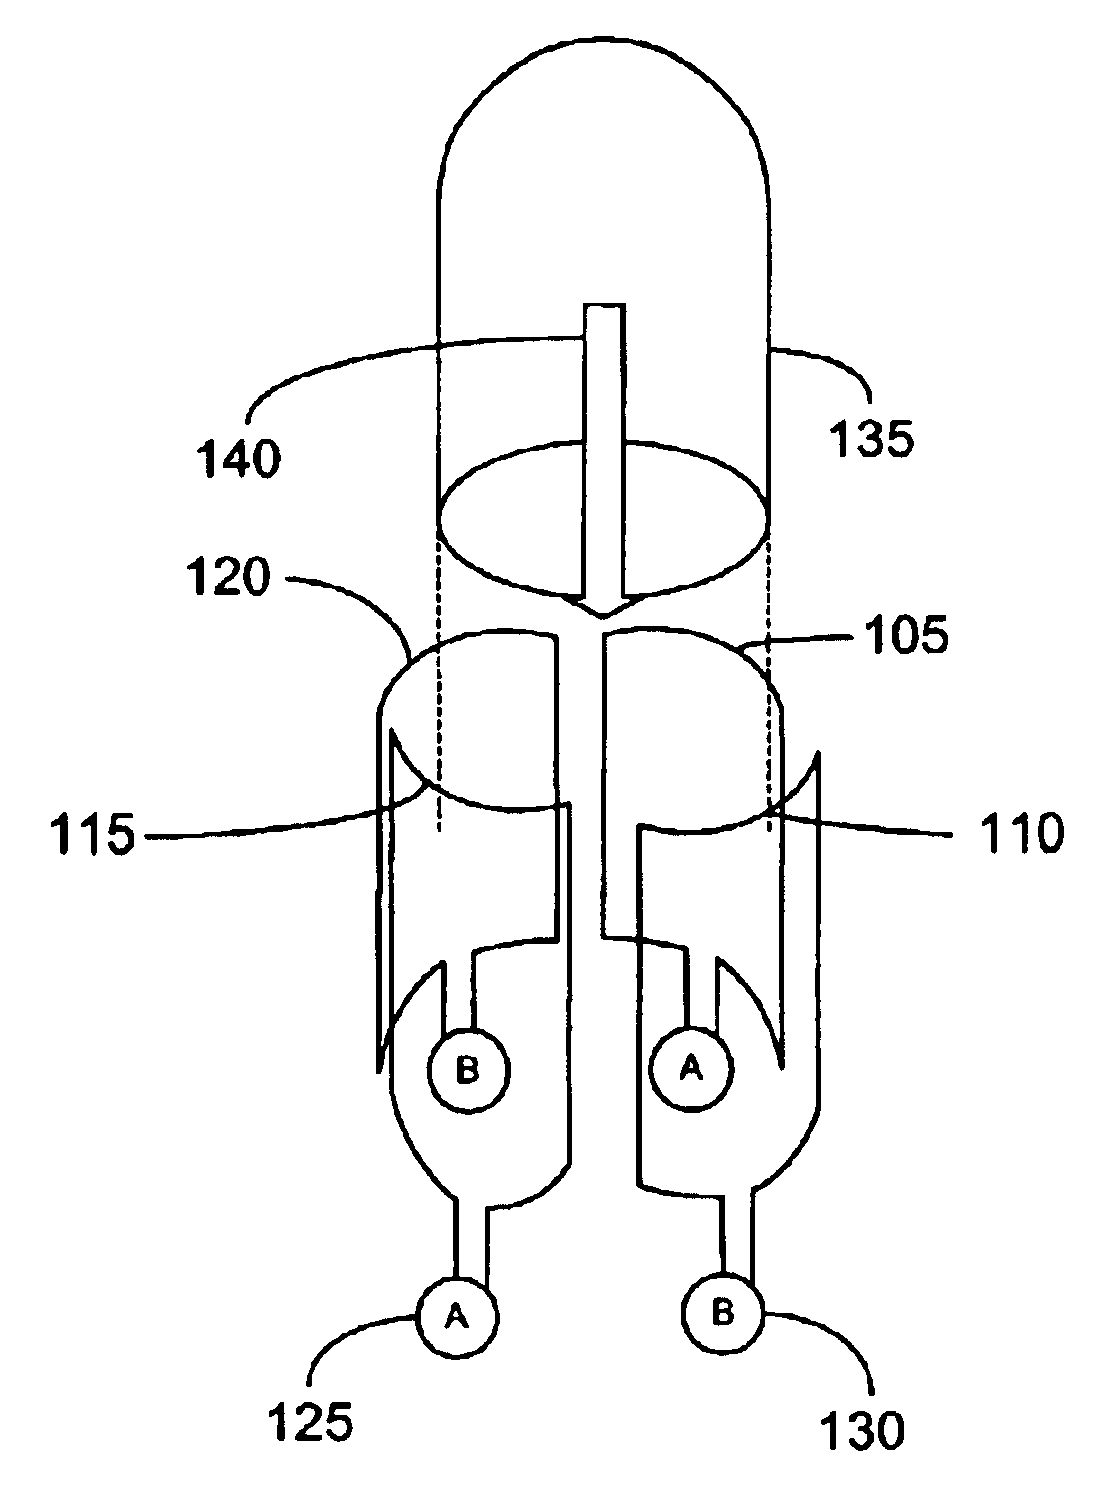 Plasma production device and method and RF driver circuit